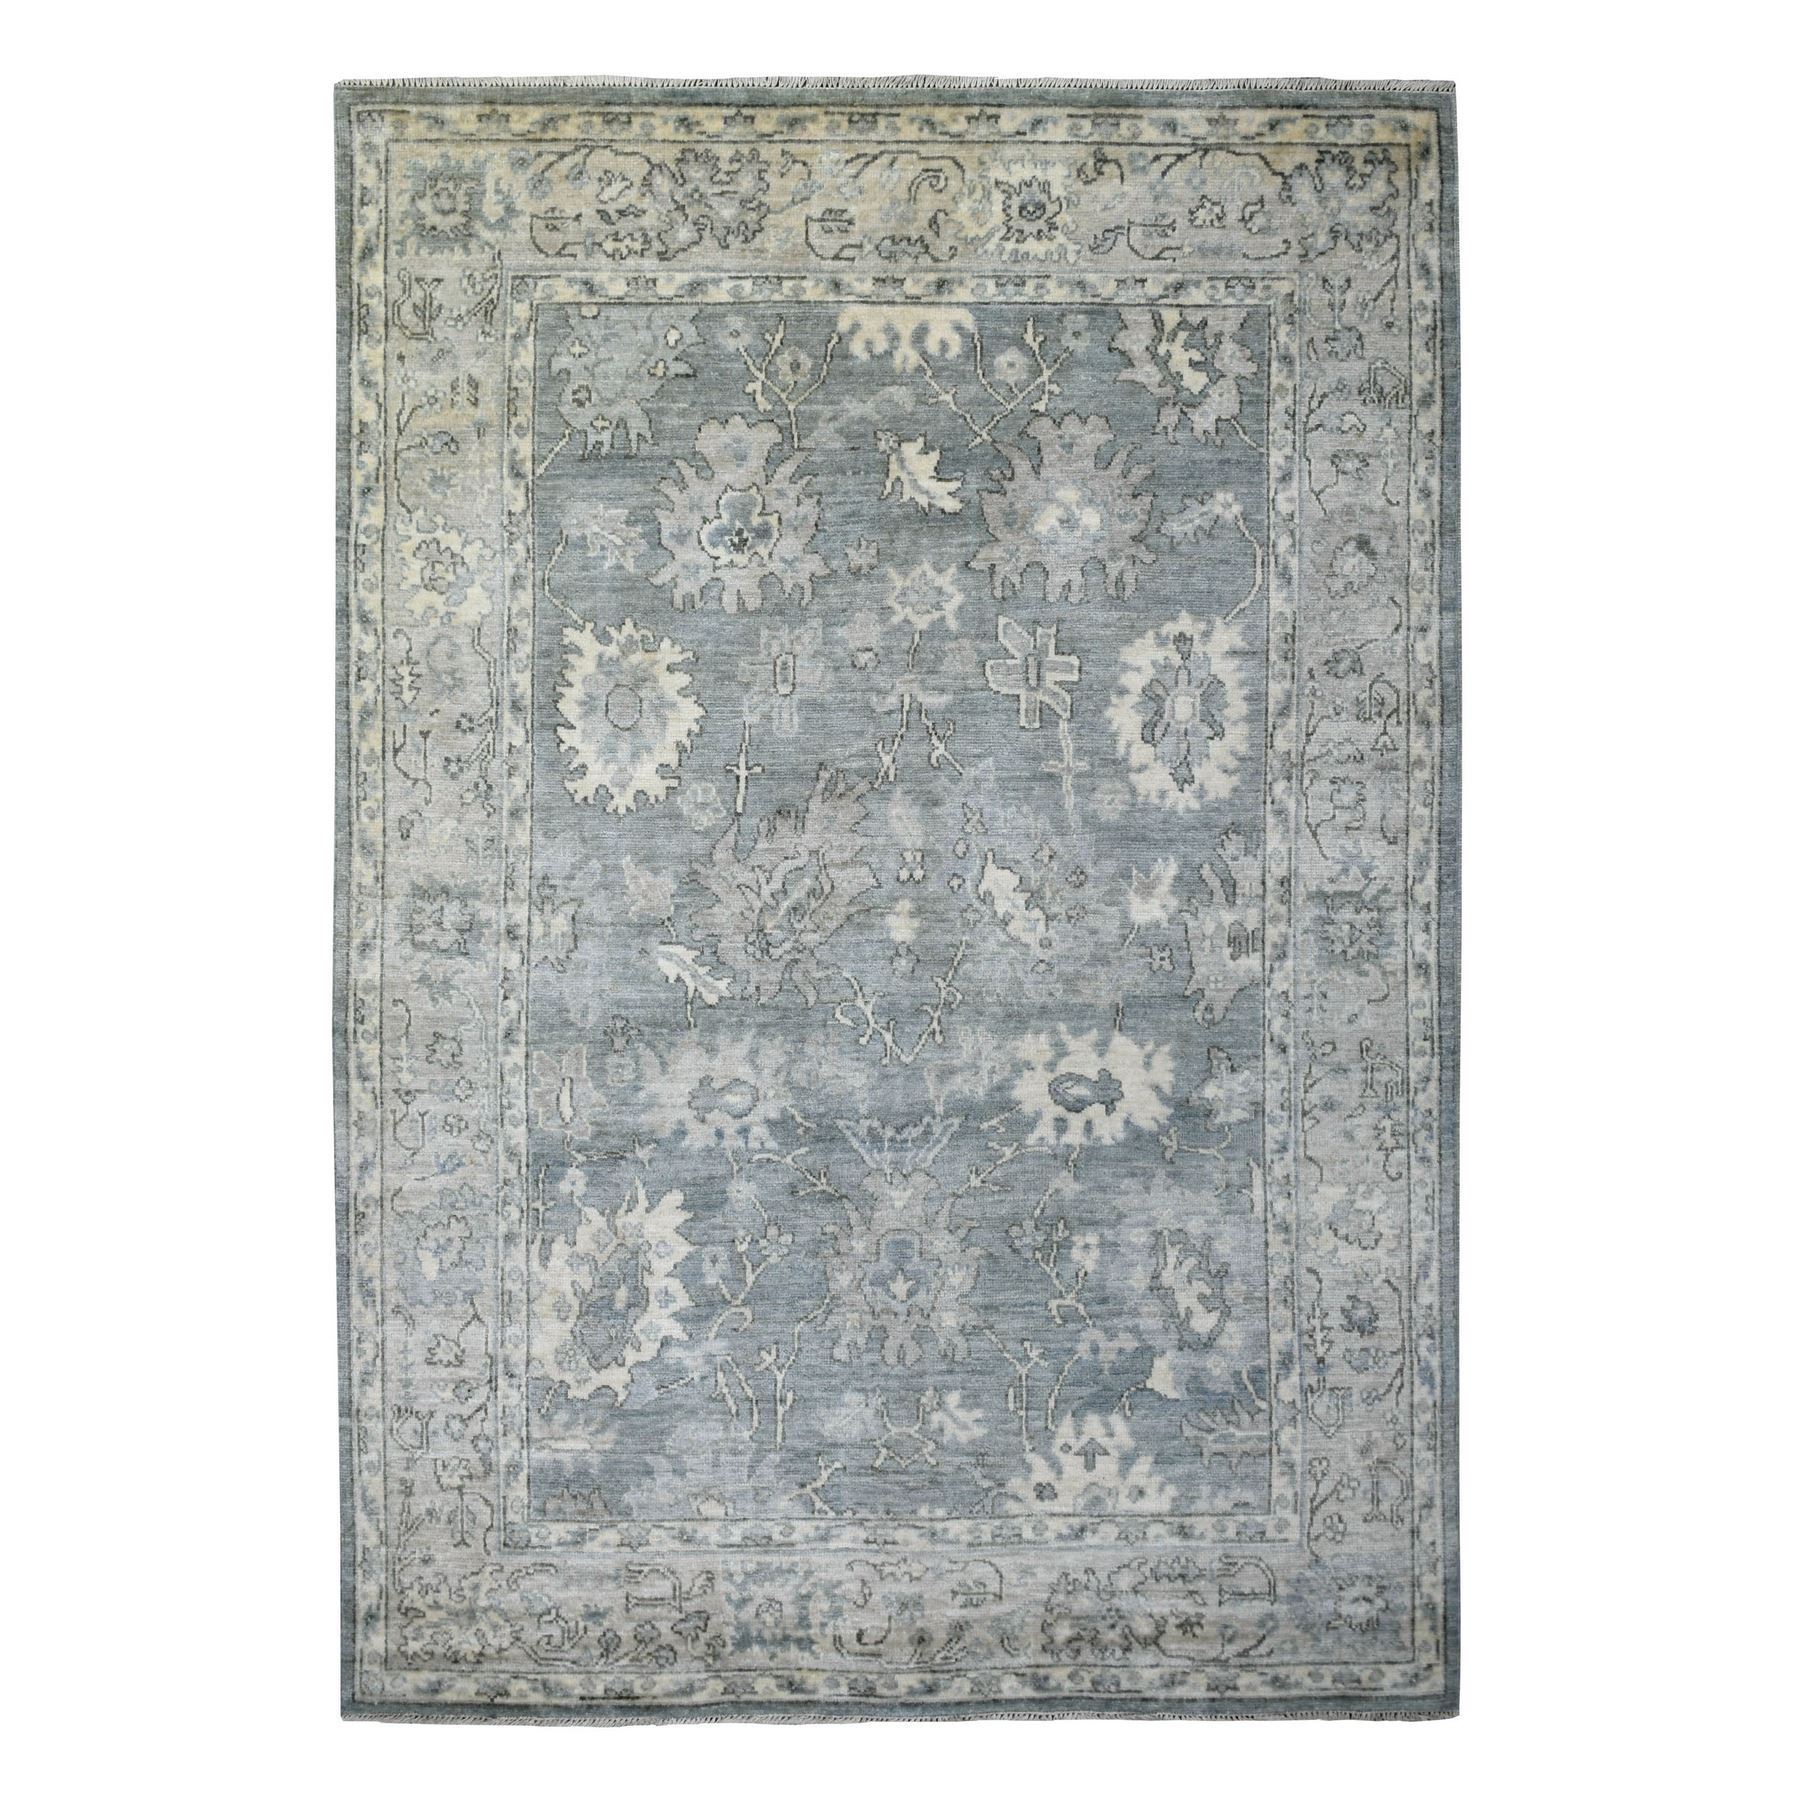 6'x8'7" Gray Hand Woven, Afghan Angora Oushak with Leaf Design, Pure Wool Oriental Rug 